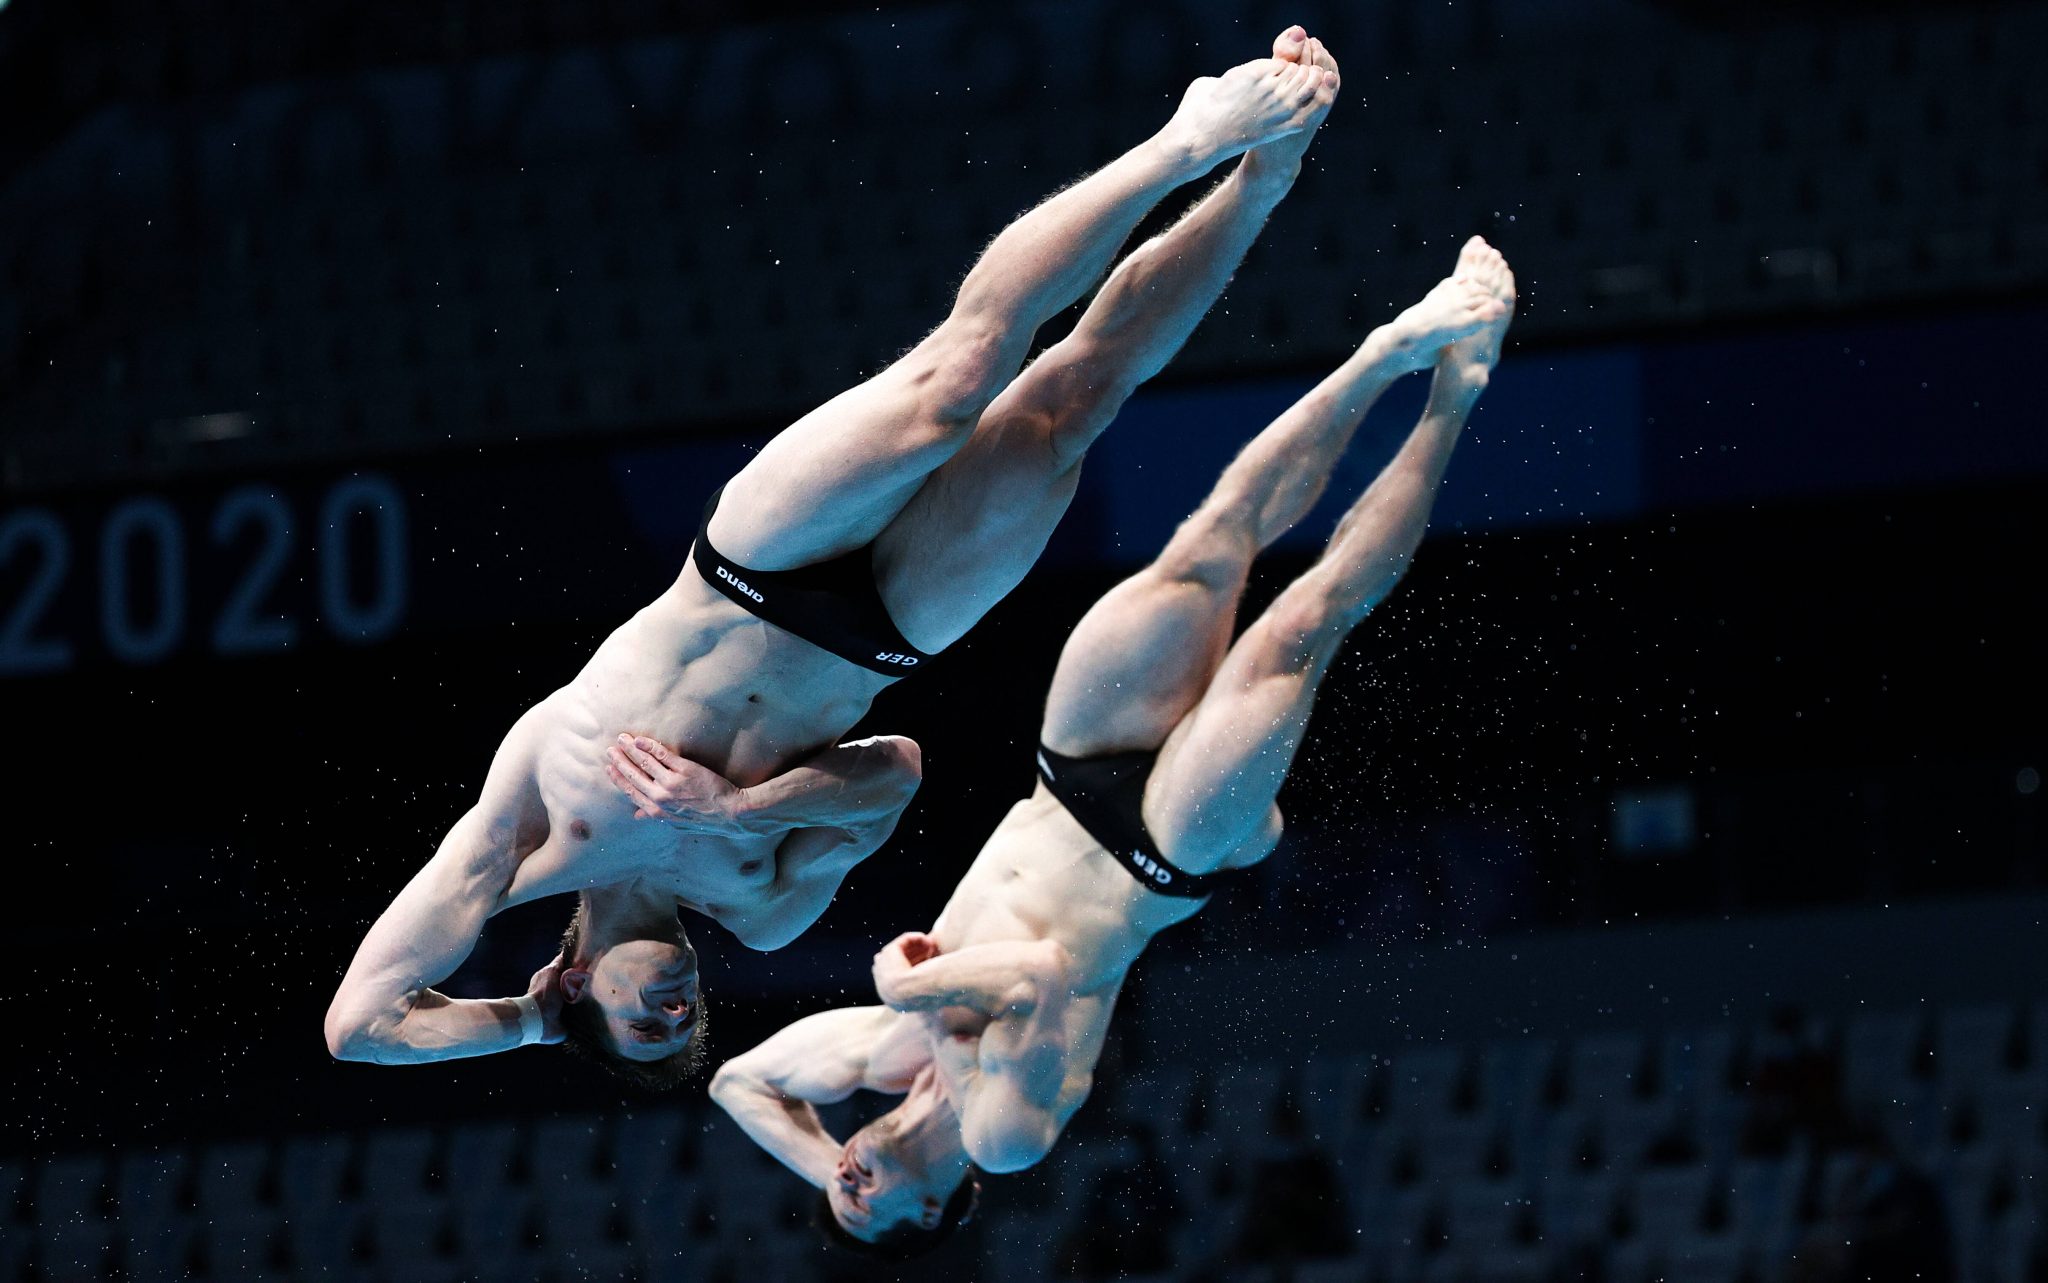 How deep is an actualsized Olympic Games diving pool?